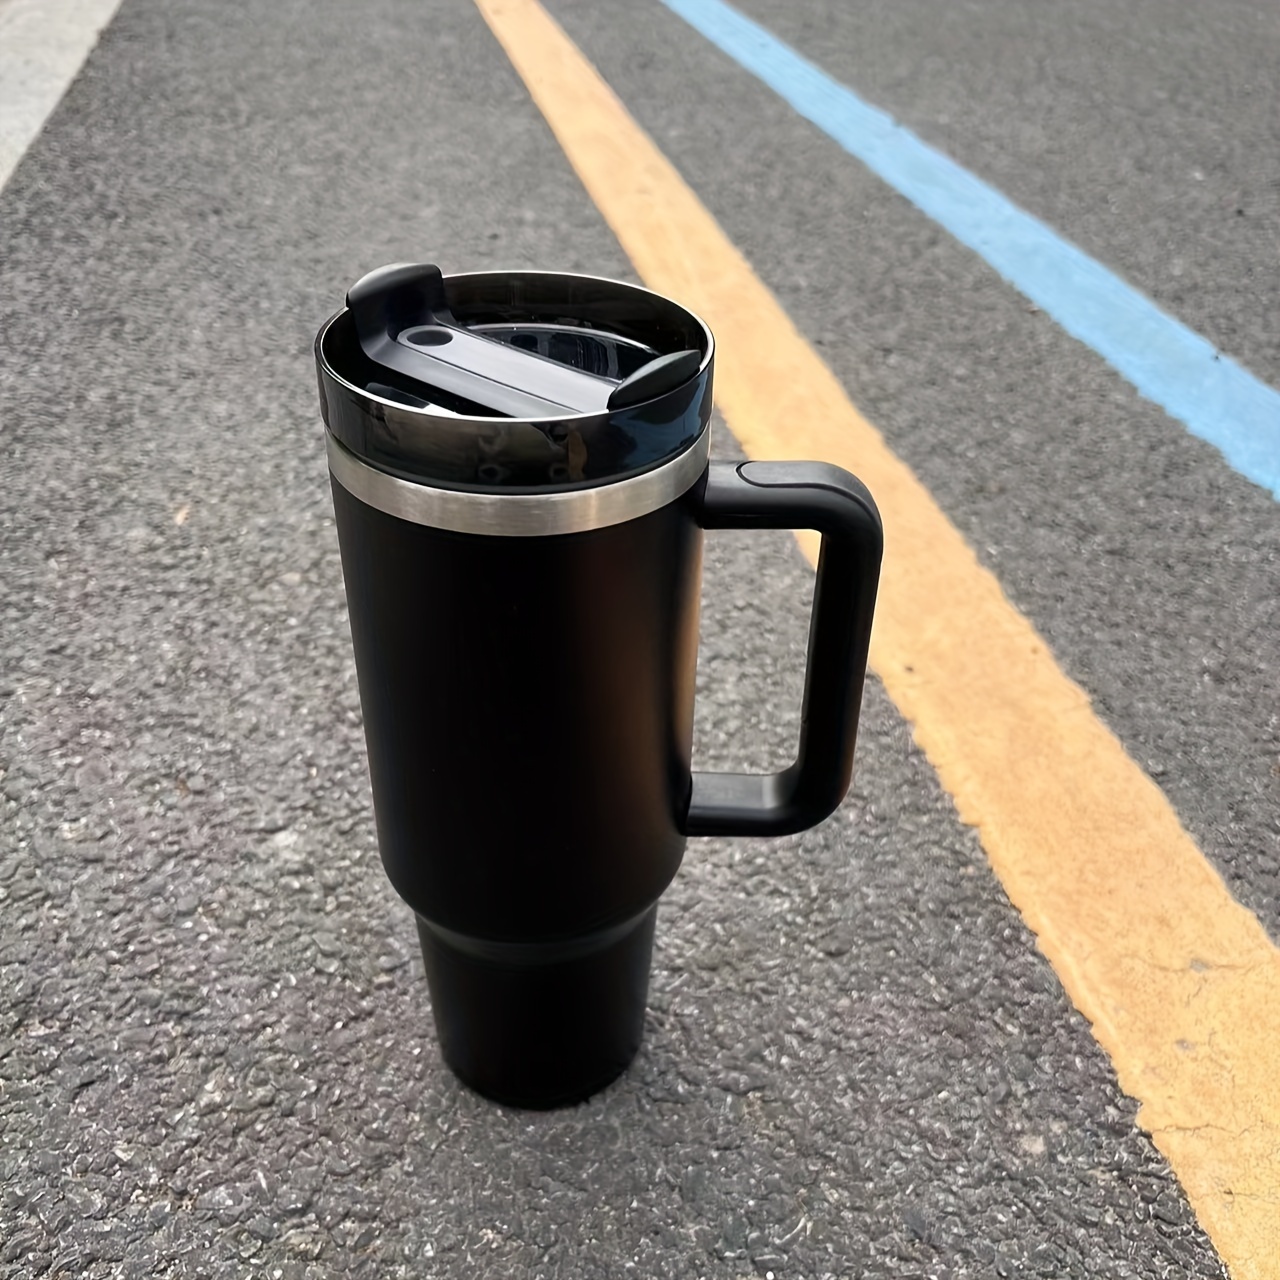 Large Capacity Insulation Tumbler With Straw, Portable Car Cup